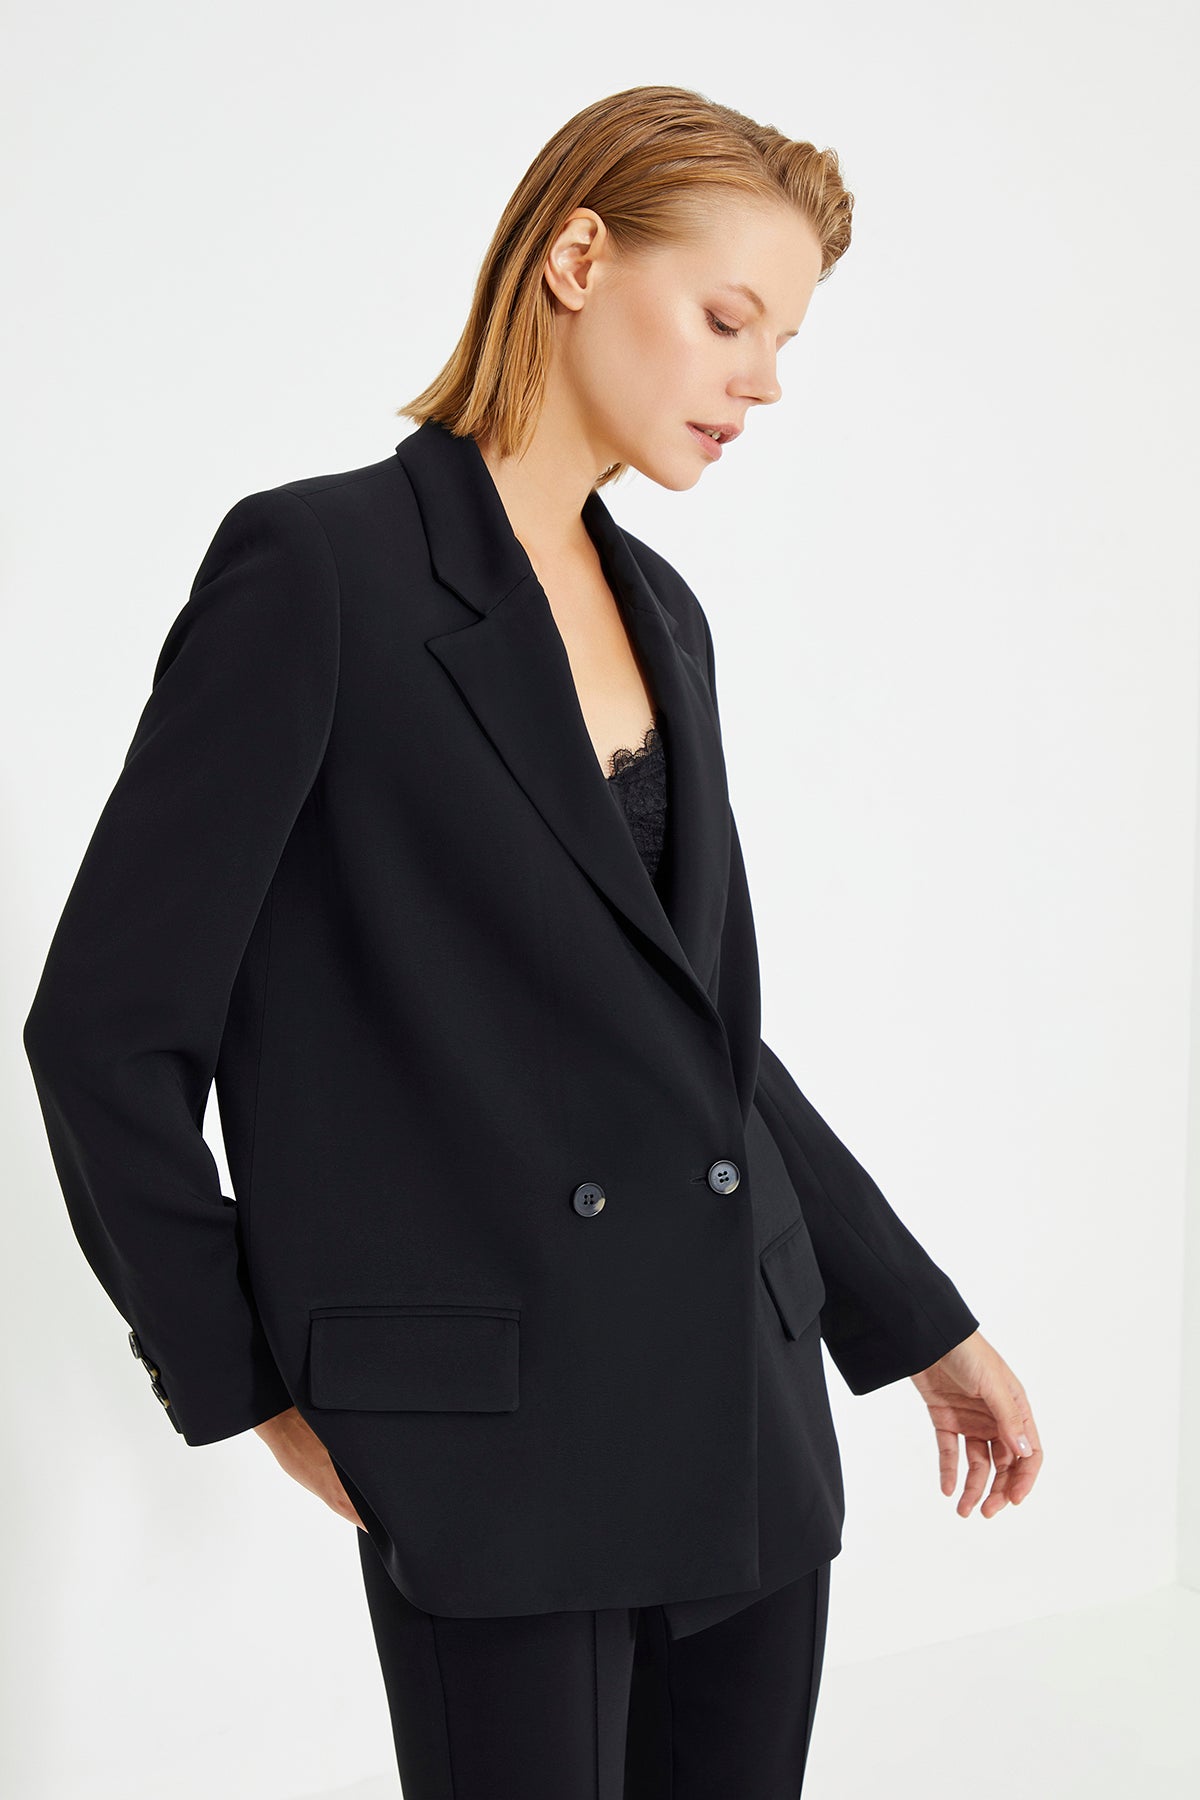 Black Double Breasted Women's Blazer Jacket With Pockets